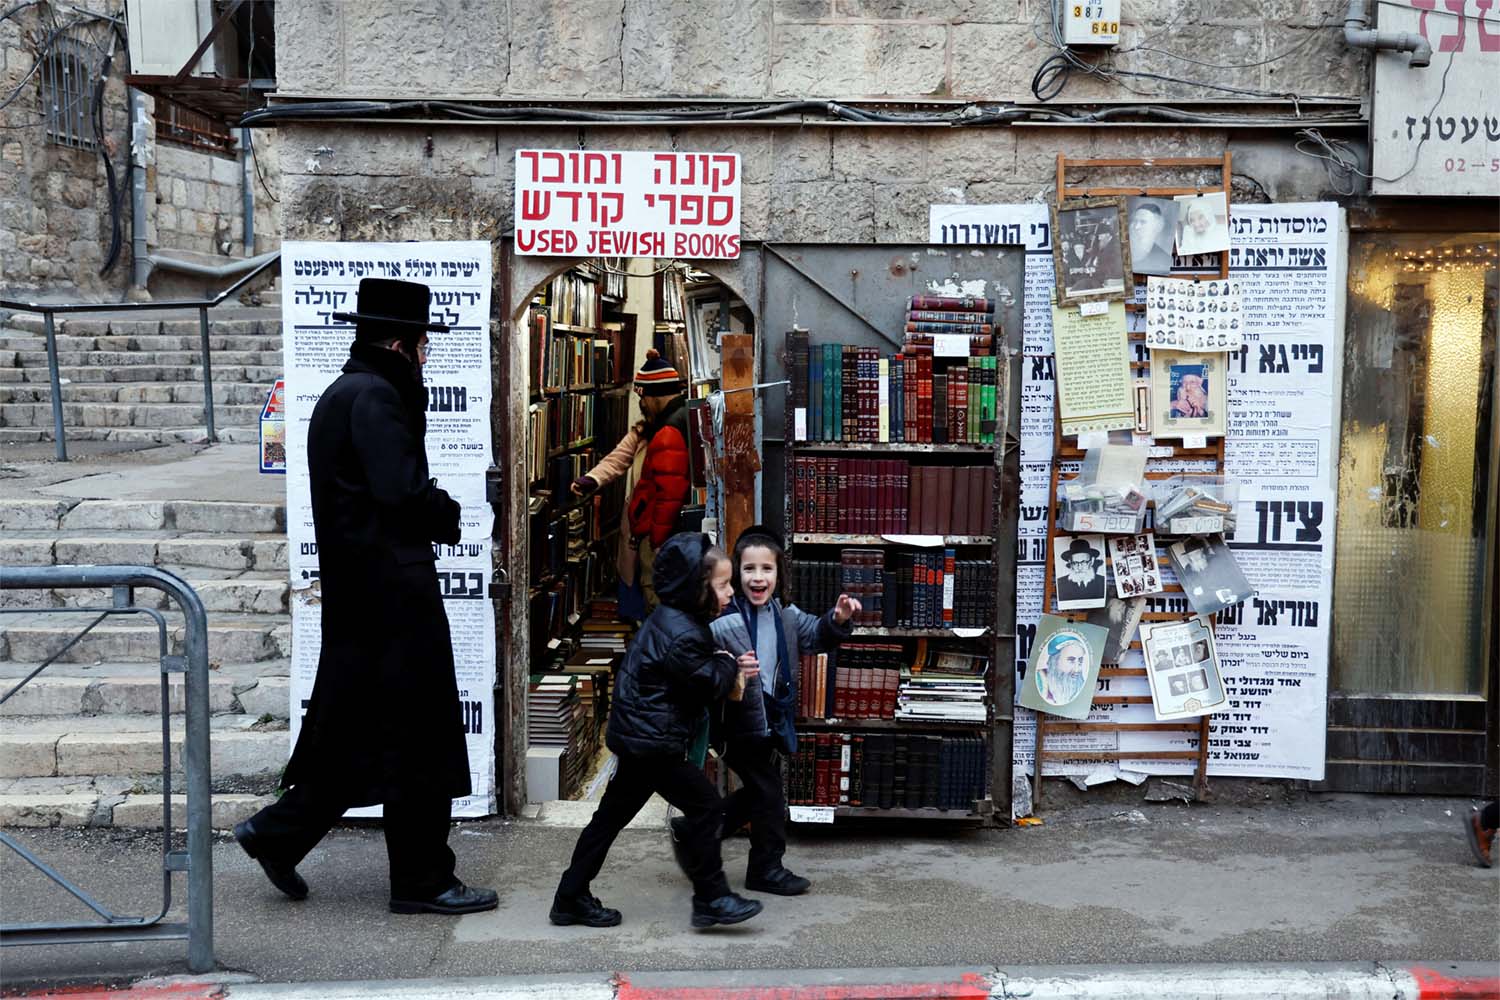 Only about half of ultra-Orthodox men have jobs